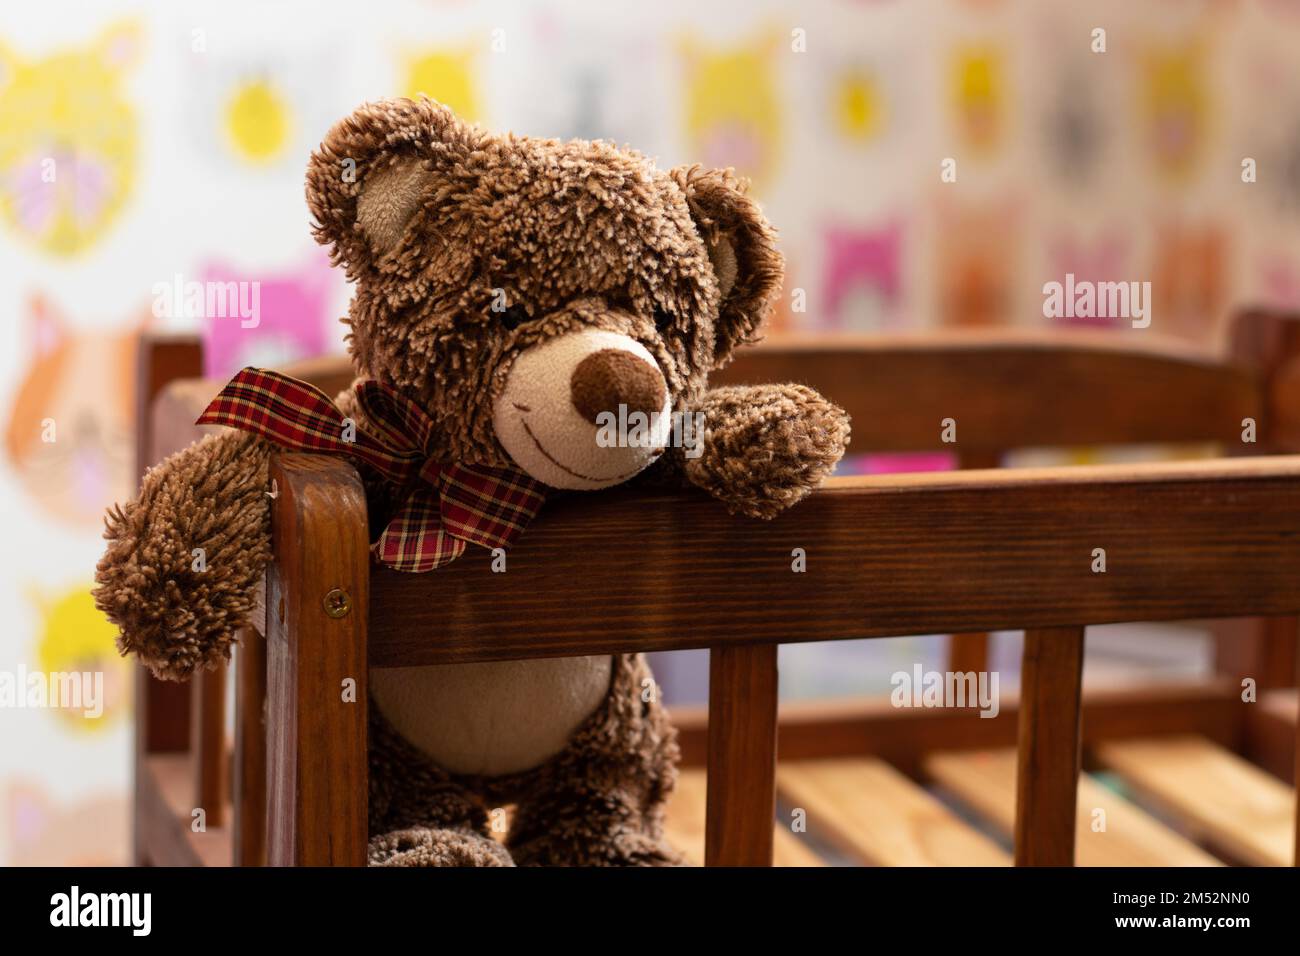 soft brown teddy bear sits in a children's wooden bed in a children's room on a blurred background Stock Photo